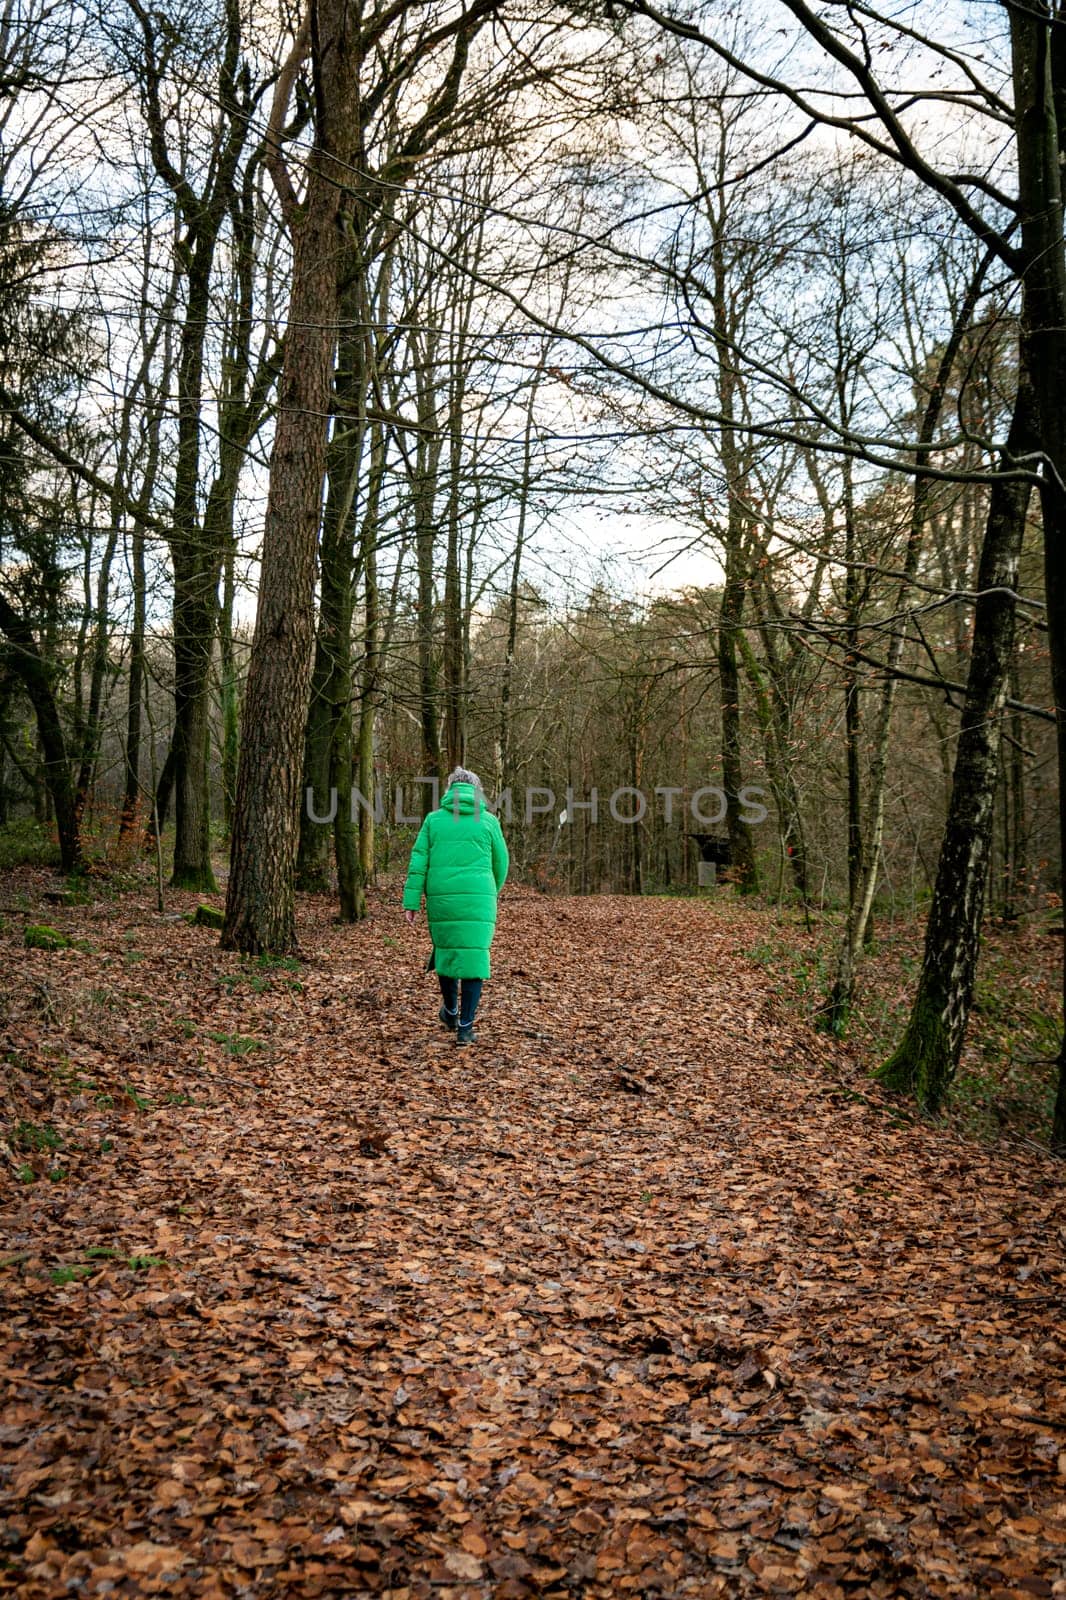 an adult woman walking on a trail in the forest by compuinfoto